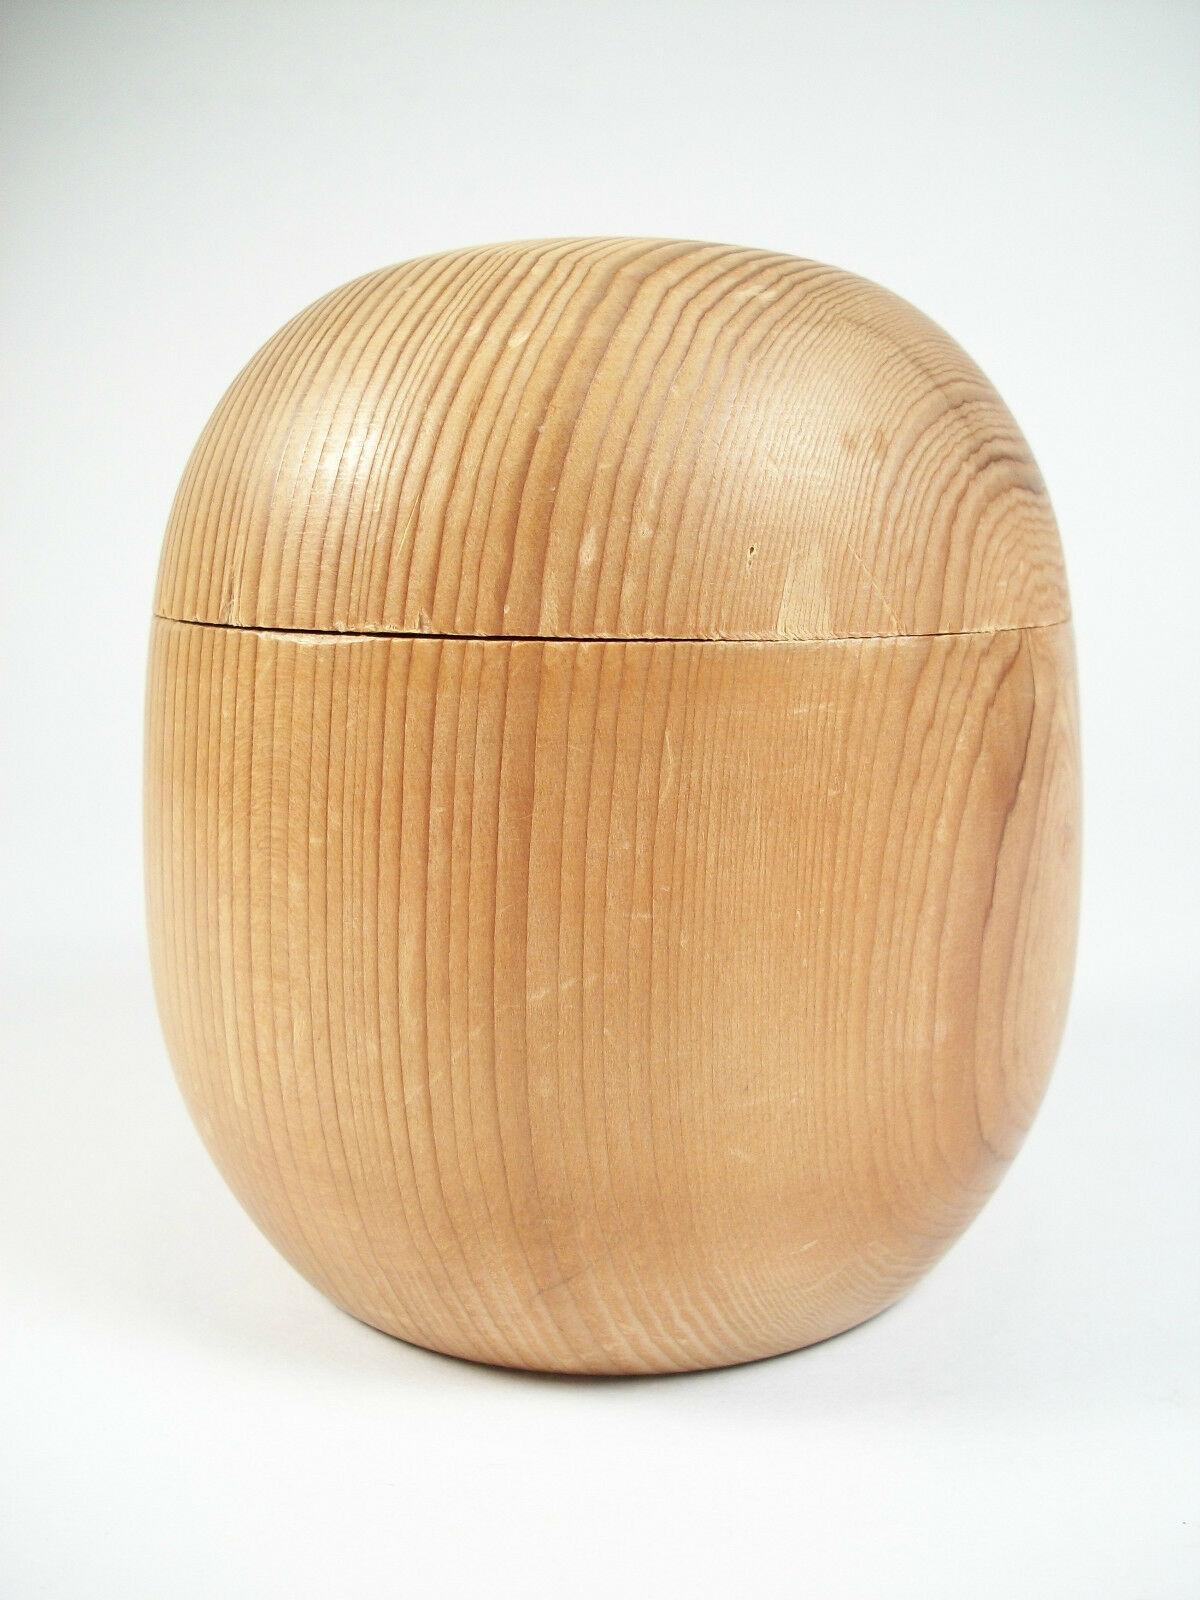 Antique Scandinavian Pine Canister, Treen Ware, Early 20th Century In Good Condition For Sale In Chatham, ON